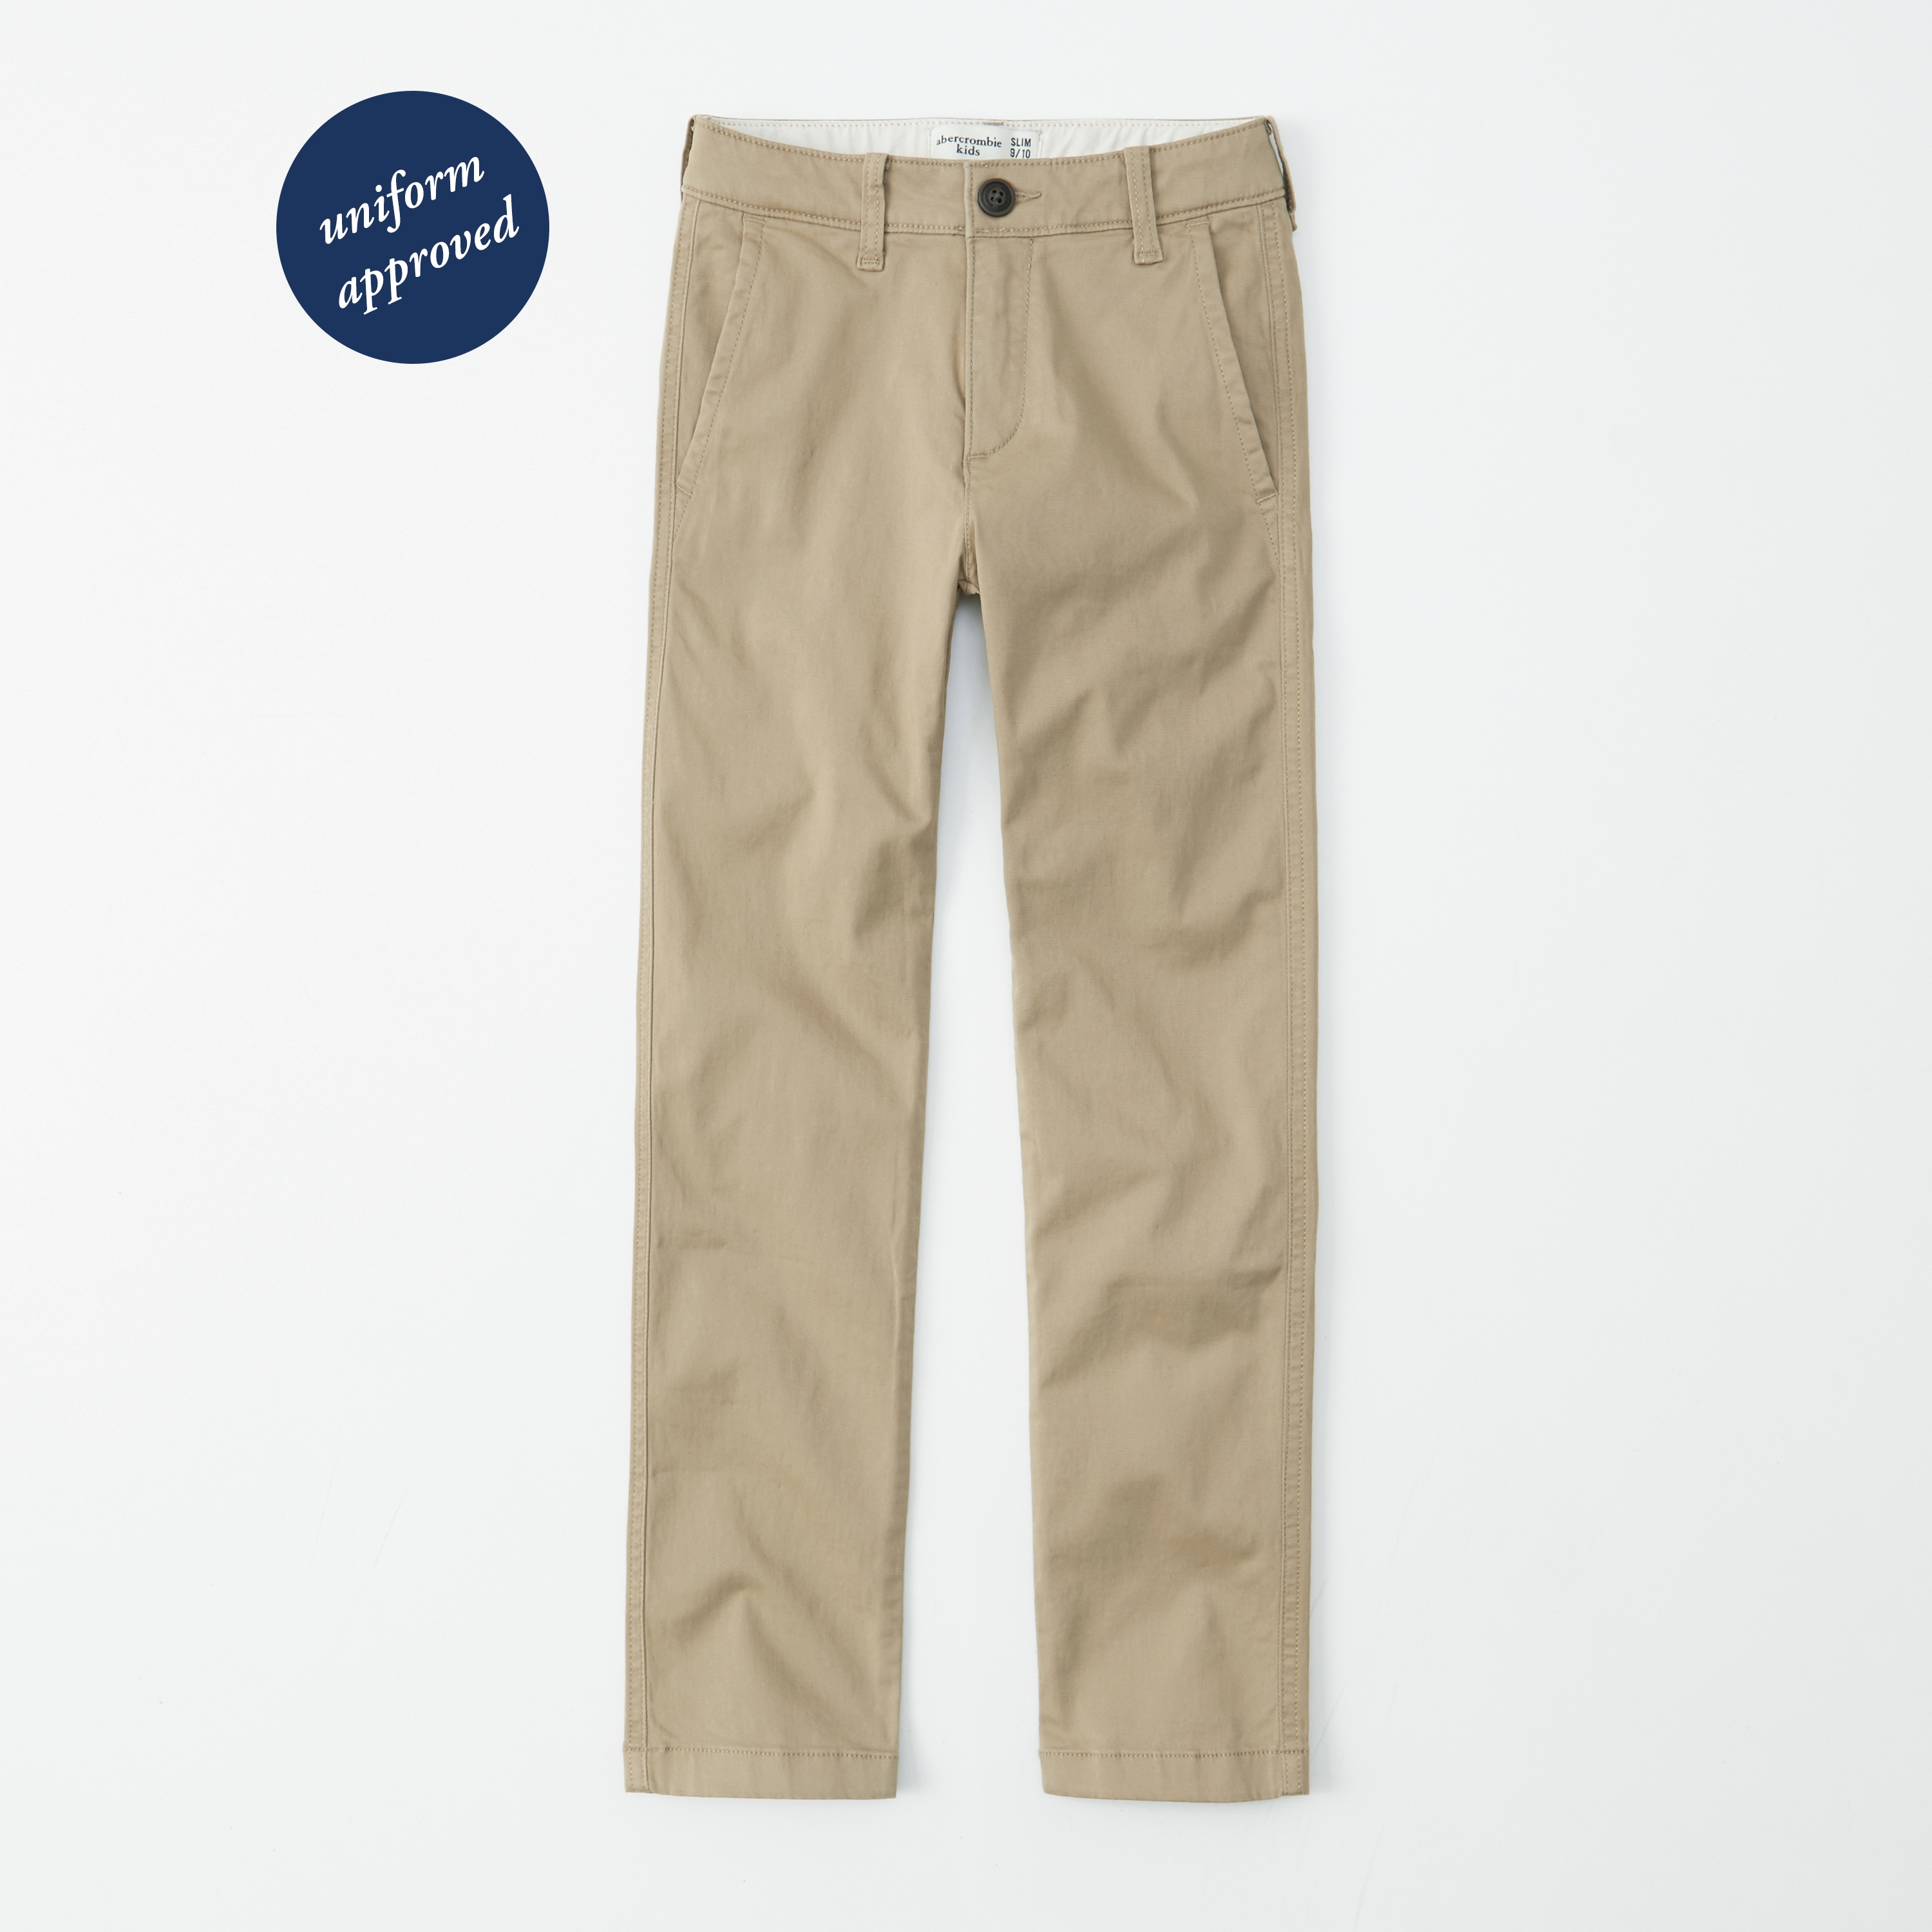 abercrombie and fitch pants kids